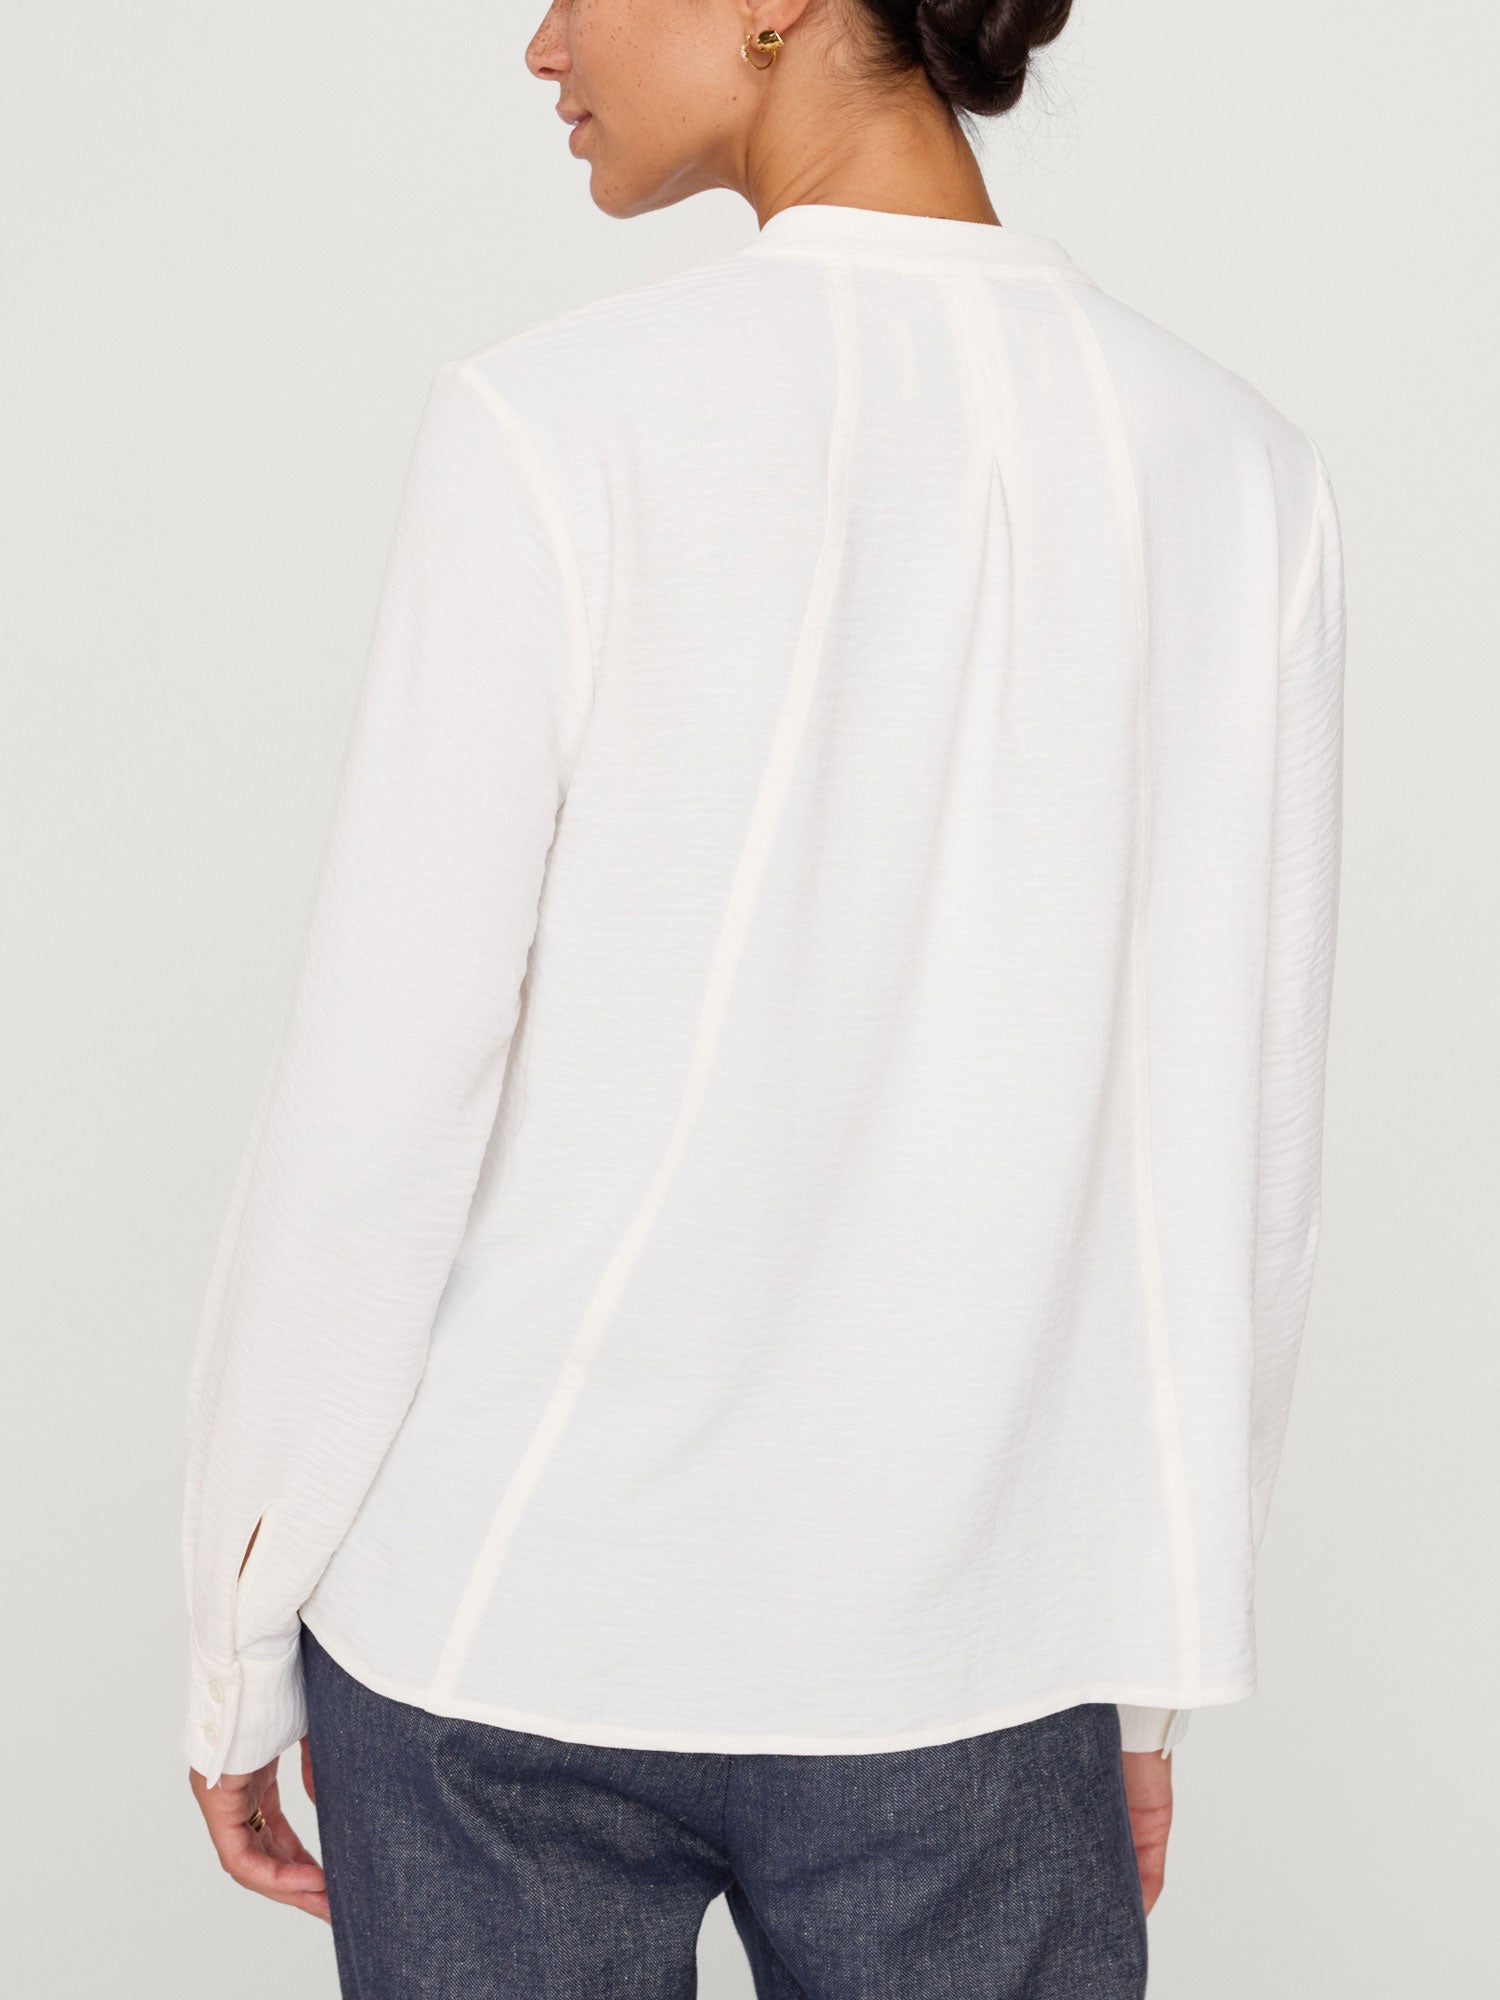 Galey button-down long sleeve white blouse back view